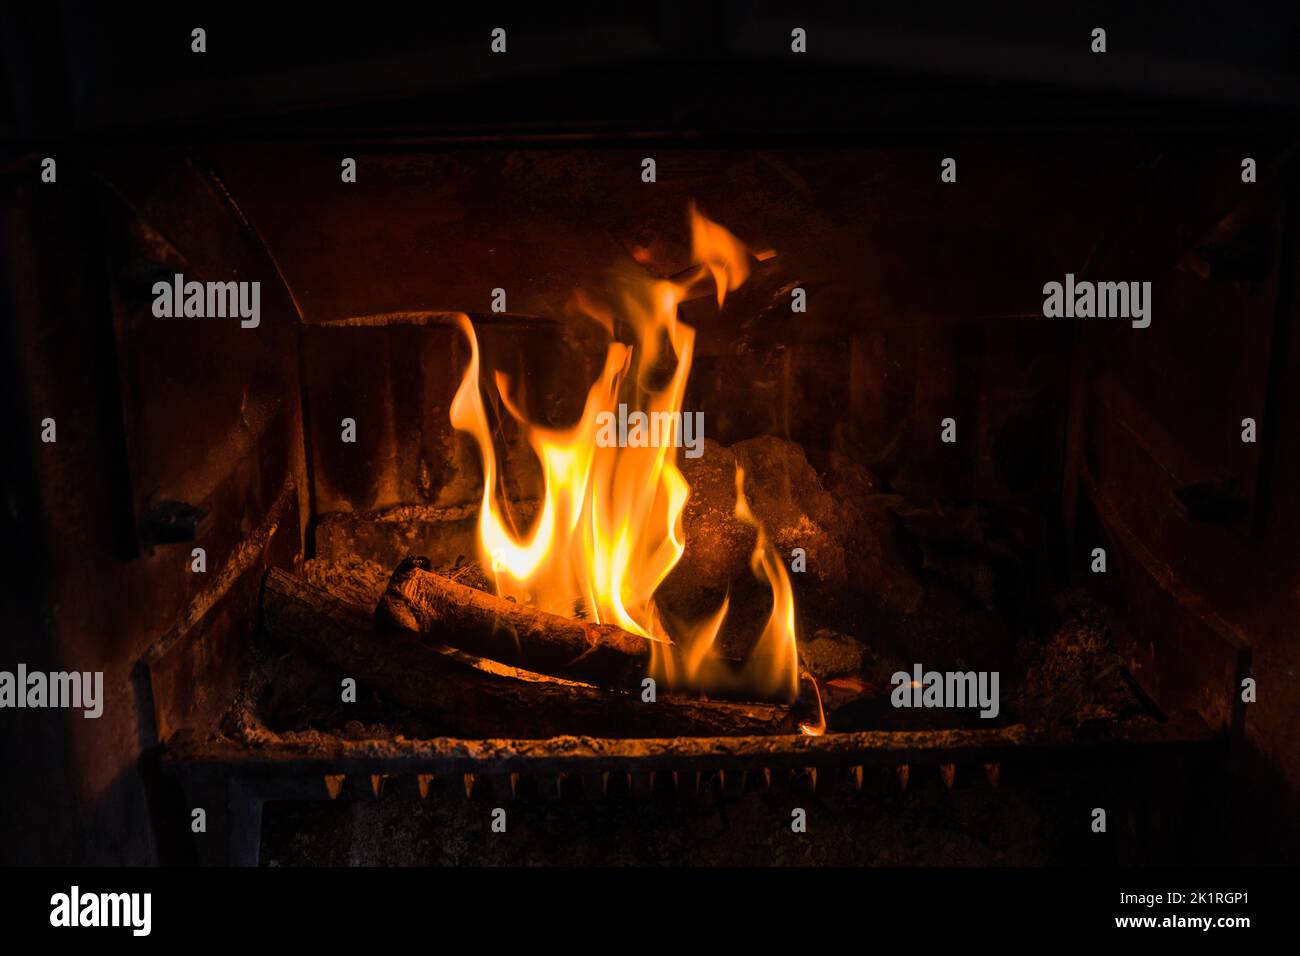 Closeup of fire burning in an old fireplace, can be used to composite in an existing image with unused fireplace Stock Photo